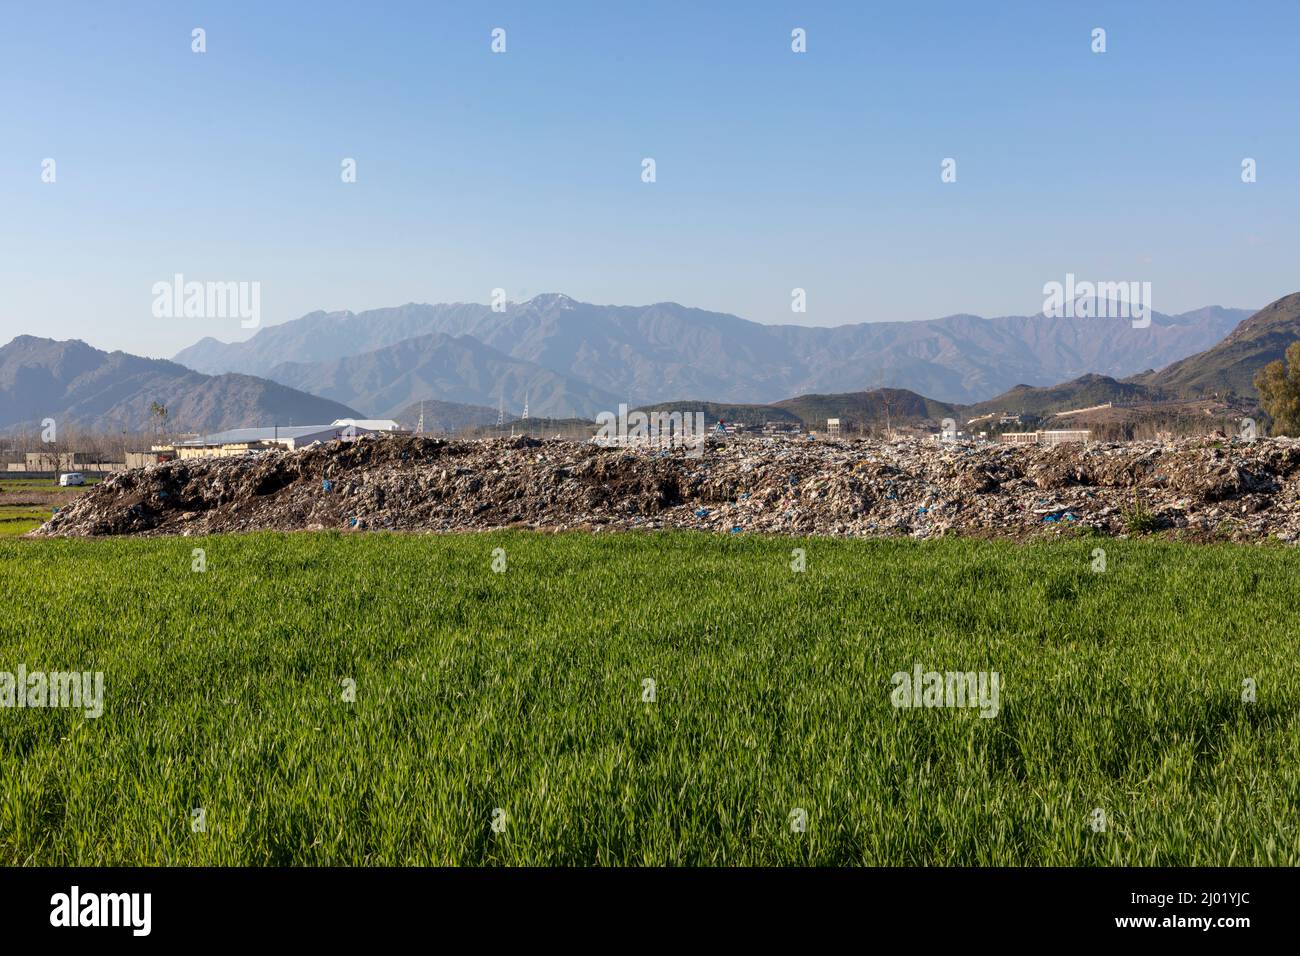 A massive garbage dump solid waste site in agriculture fields Stock Photo